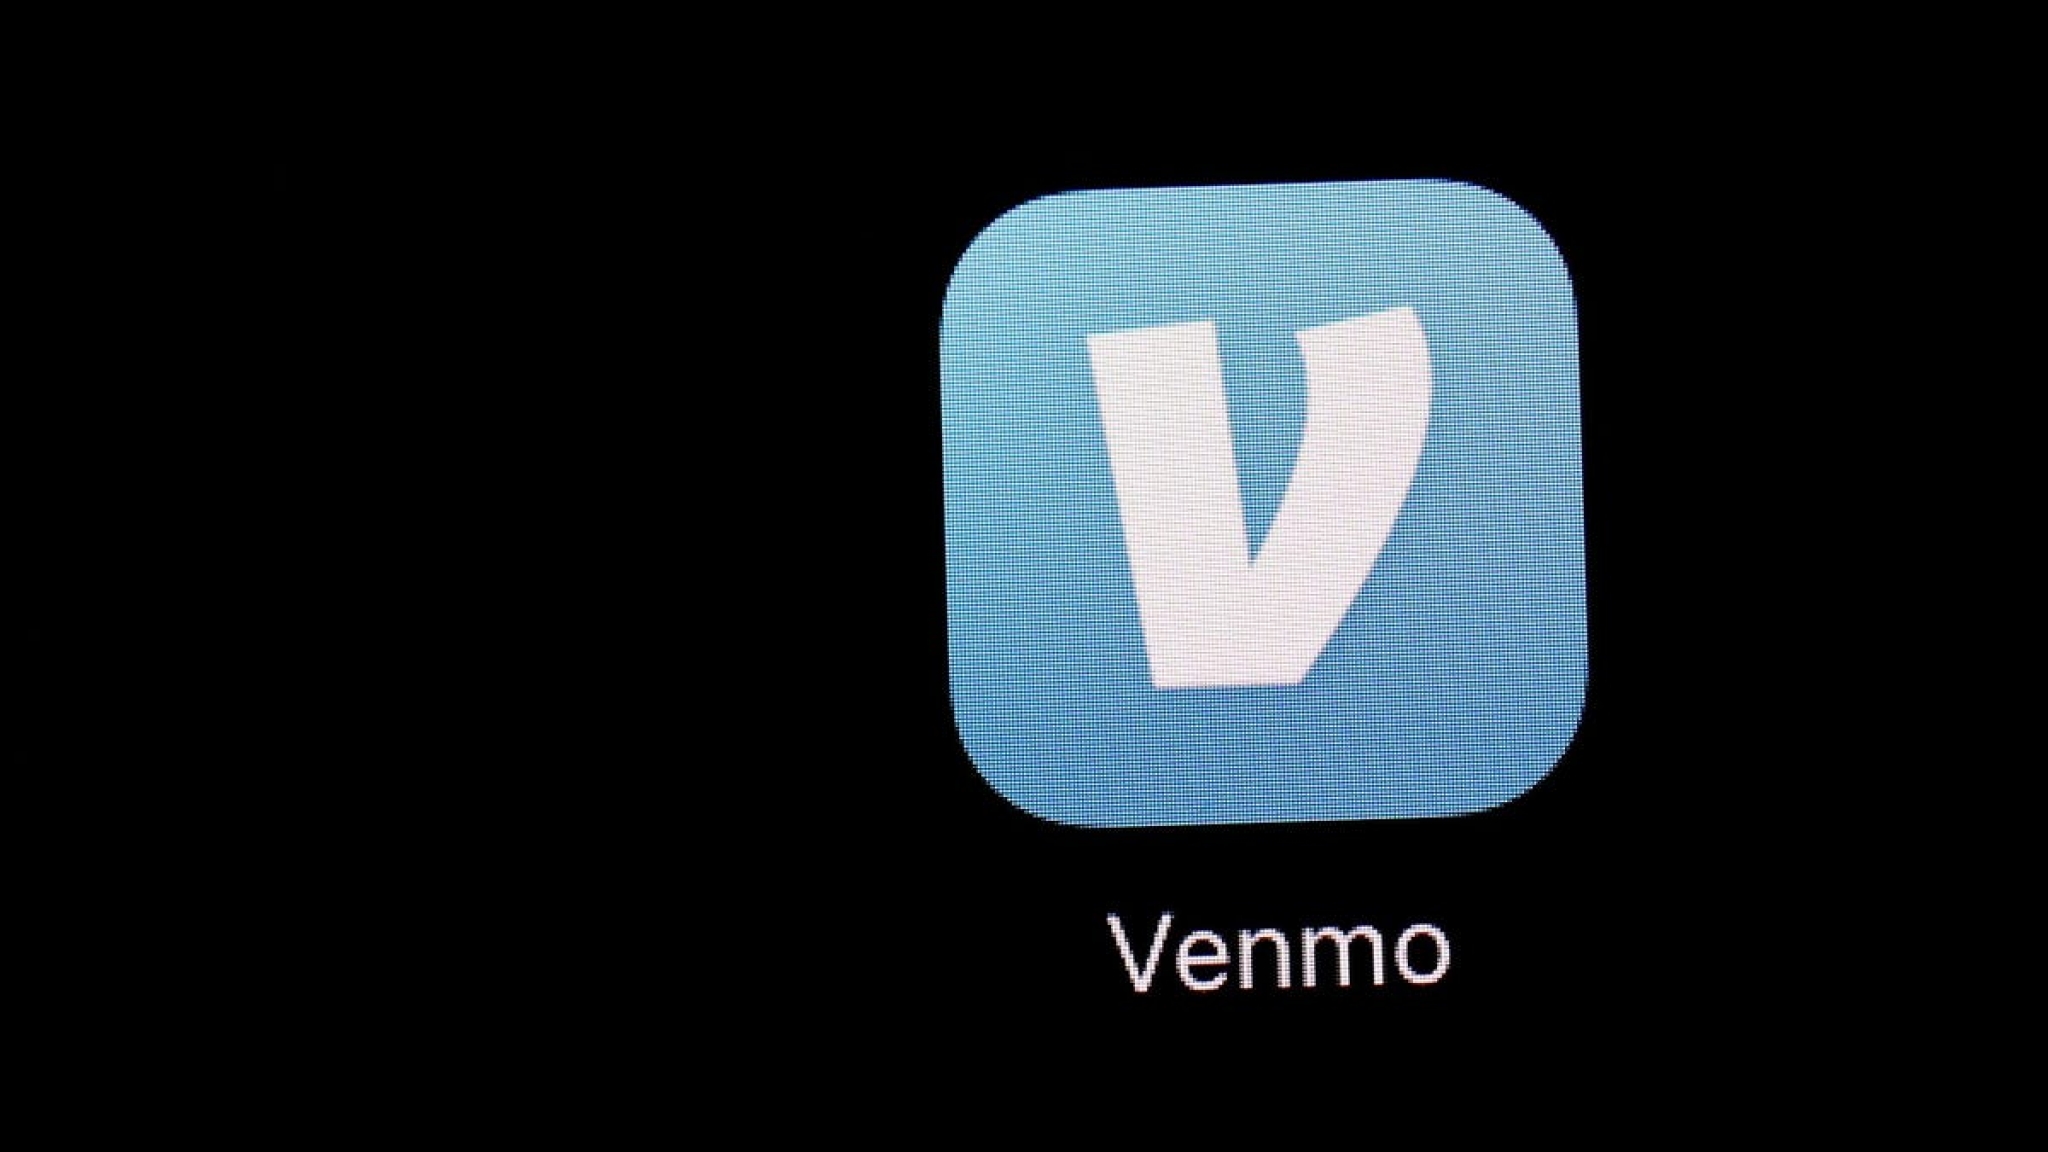 President Biden’s Alleged Venmo Account Was Found in Less Than 10 Minutes and Then Promptly Disappeared